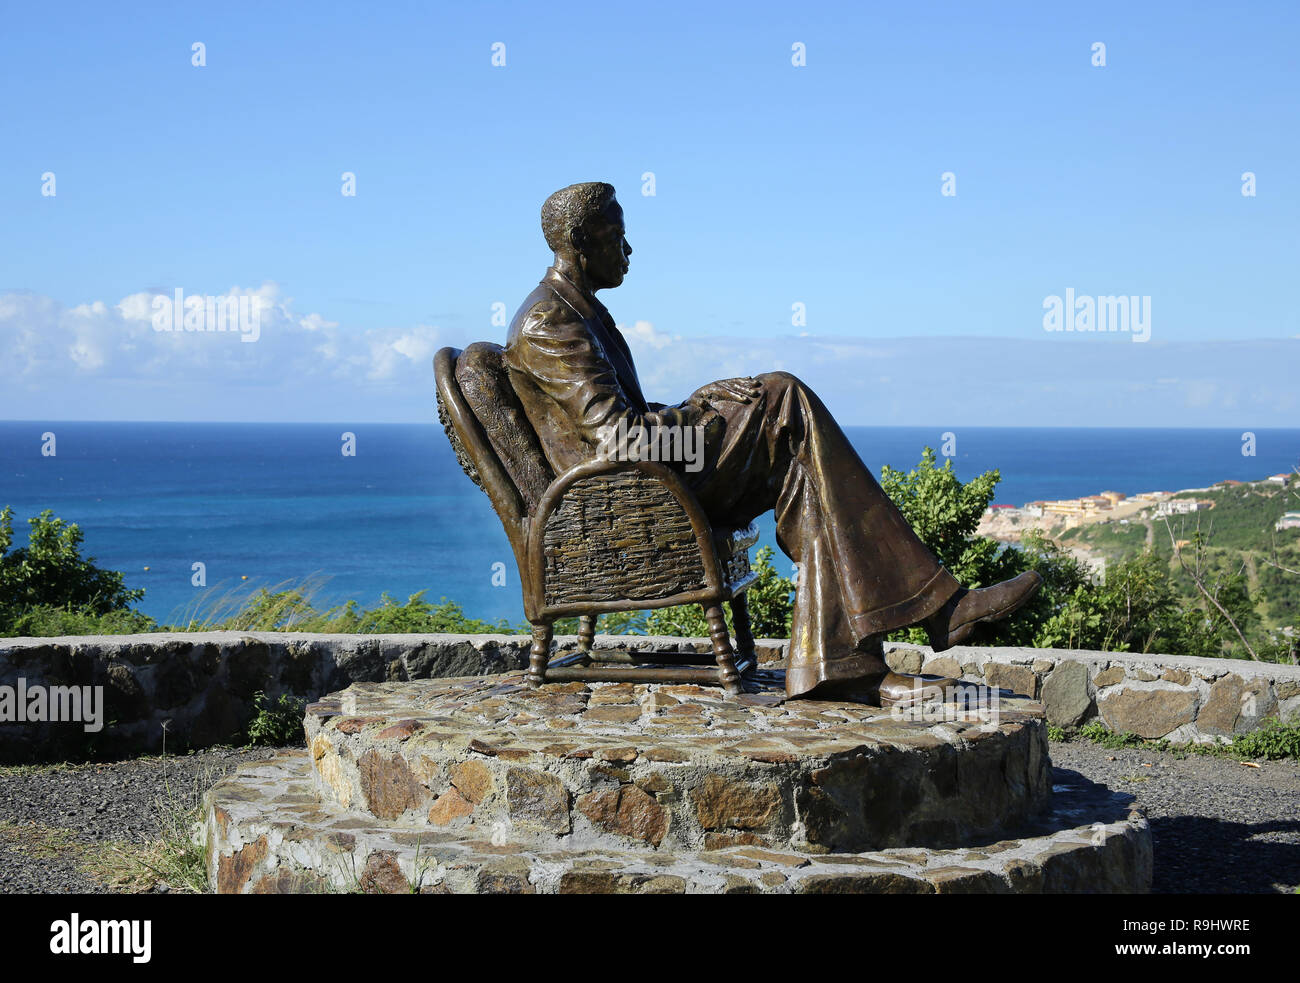 The statue of the lone figure on top of Cole Bay Hill on the Caribbean island of Sint Maarten taking in the view across the landscape towards Anguilla. Stock Photo